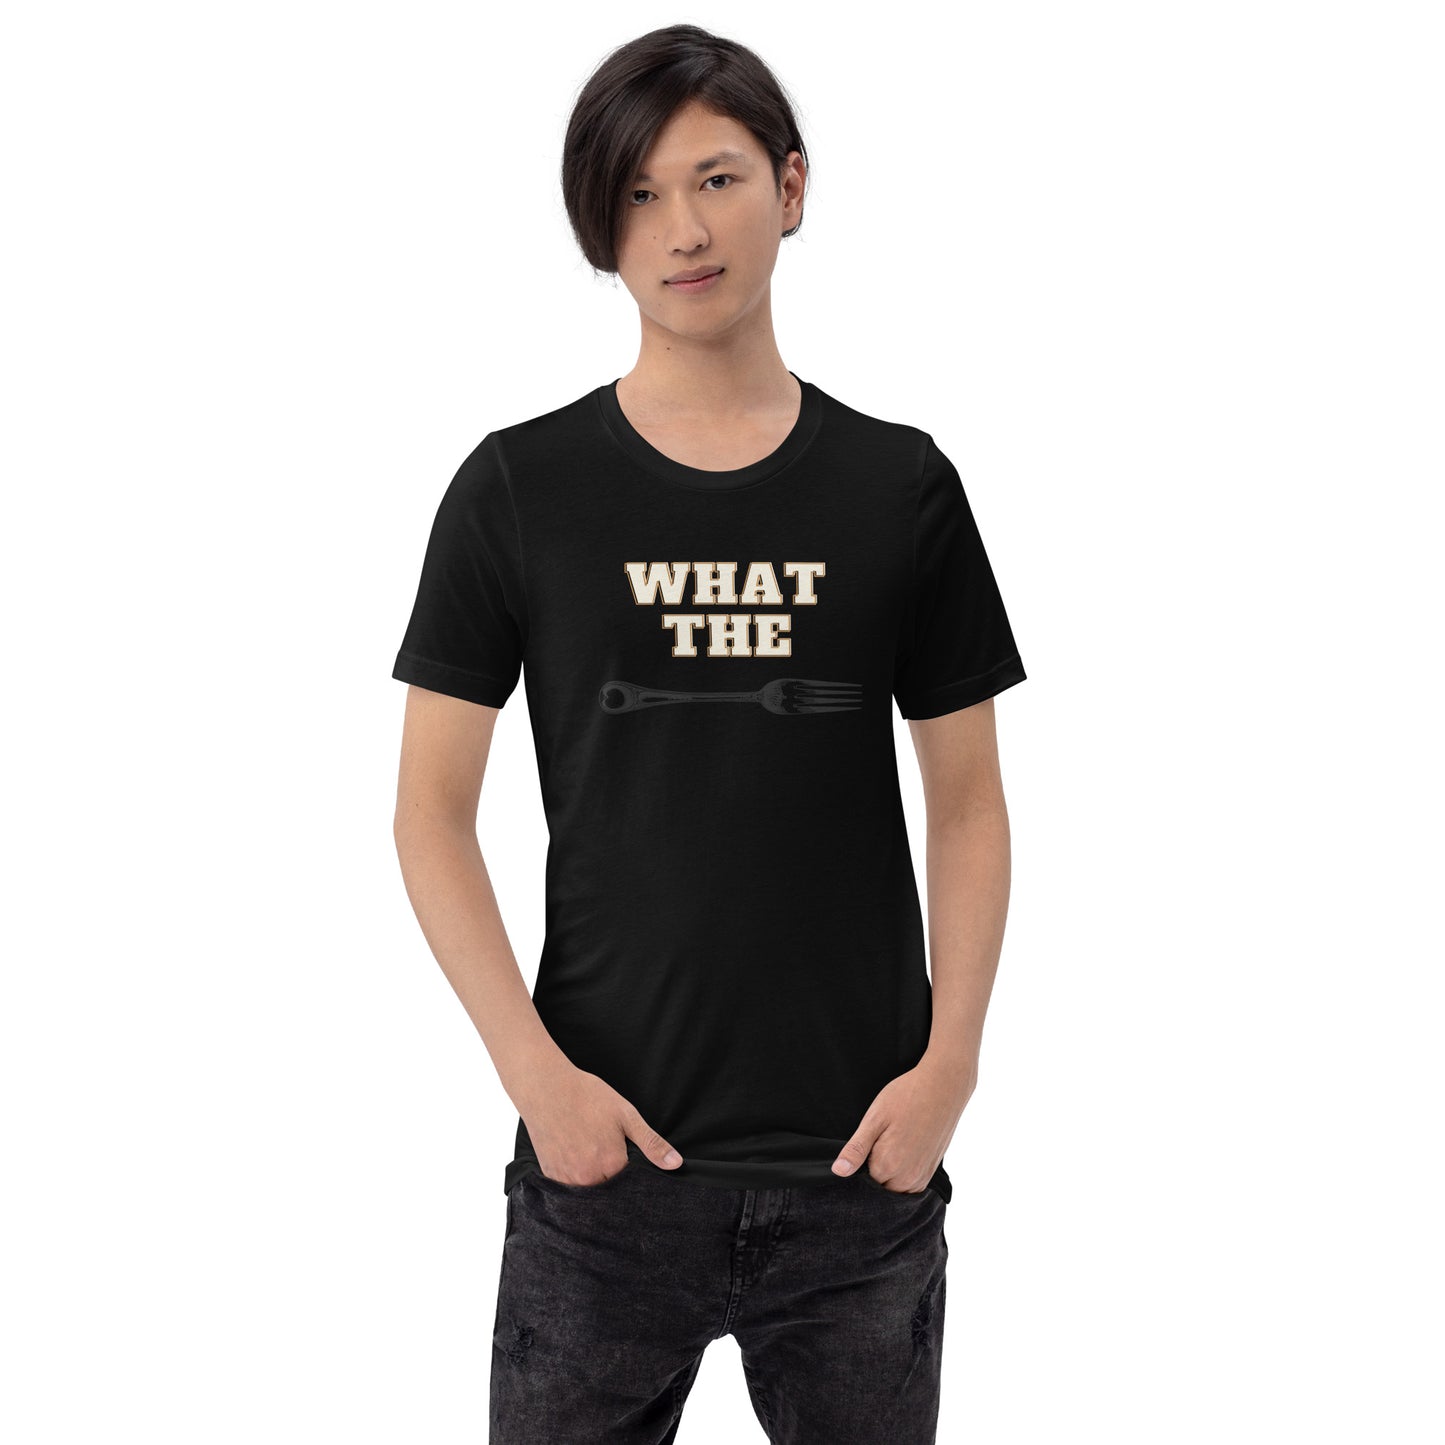 What The Fork T-Shirt..